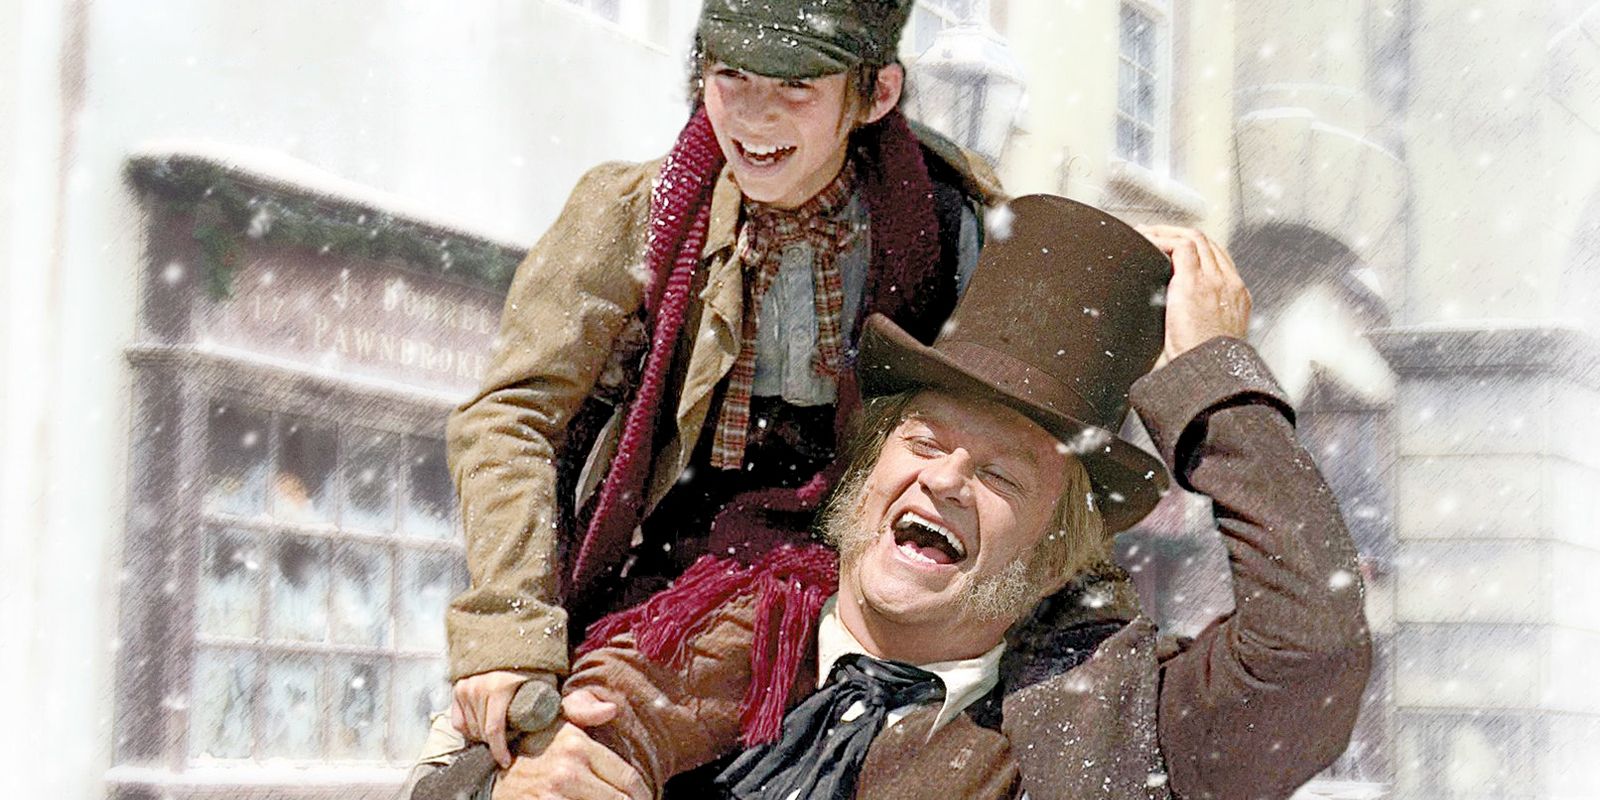 Kelsey Grammer is Scrooge carrying Tiny Tim in A Christmas Carol: The Musical.